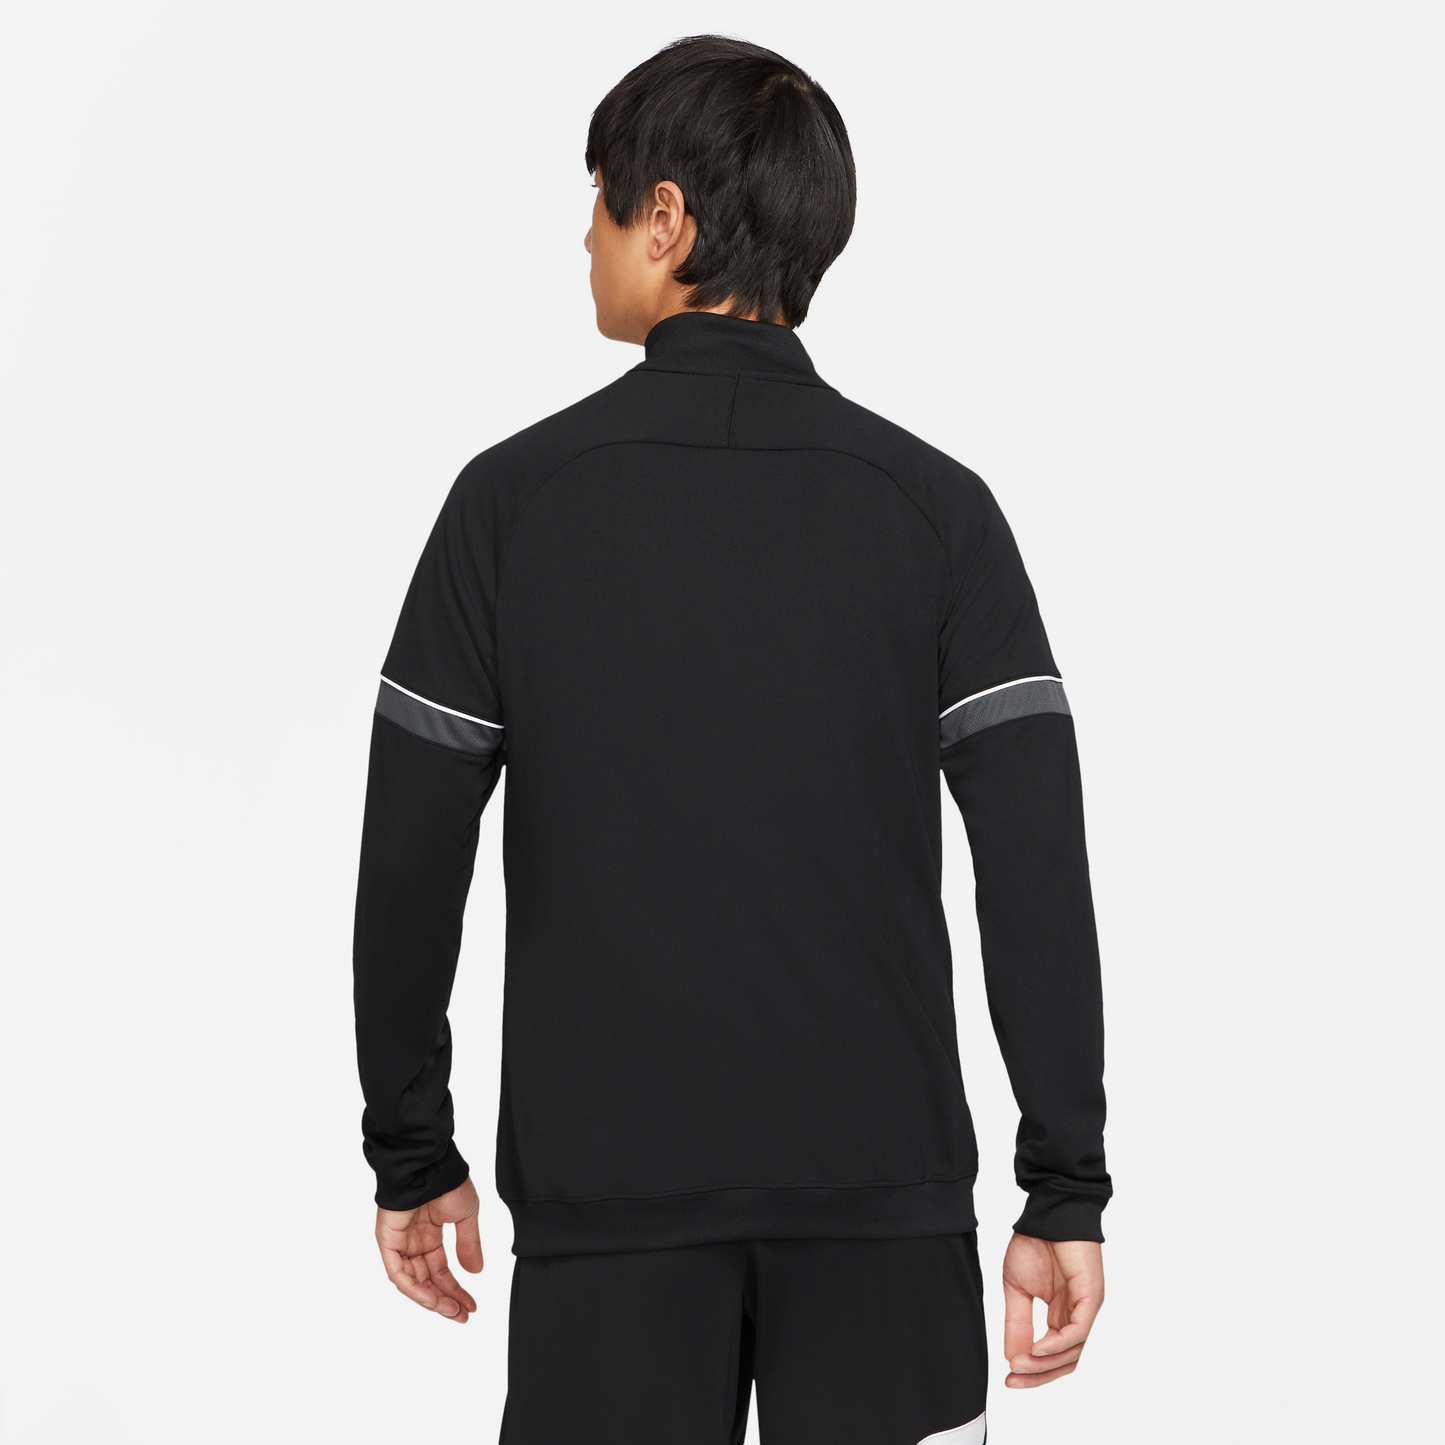 STOKES VALLEY FC NIKE TRACK JACKET - YOUTH'S